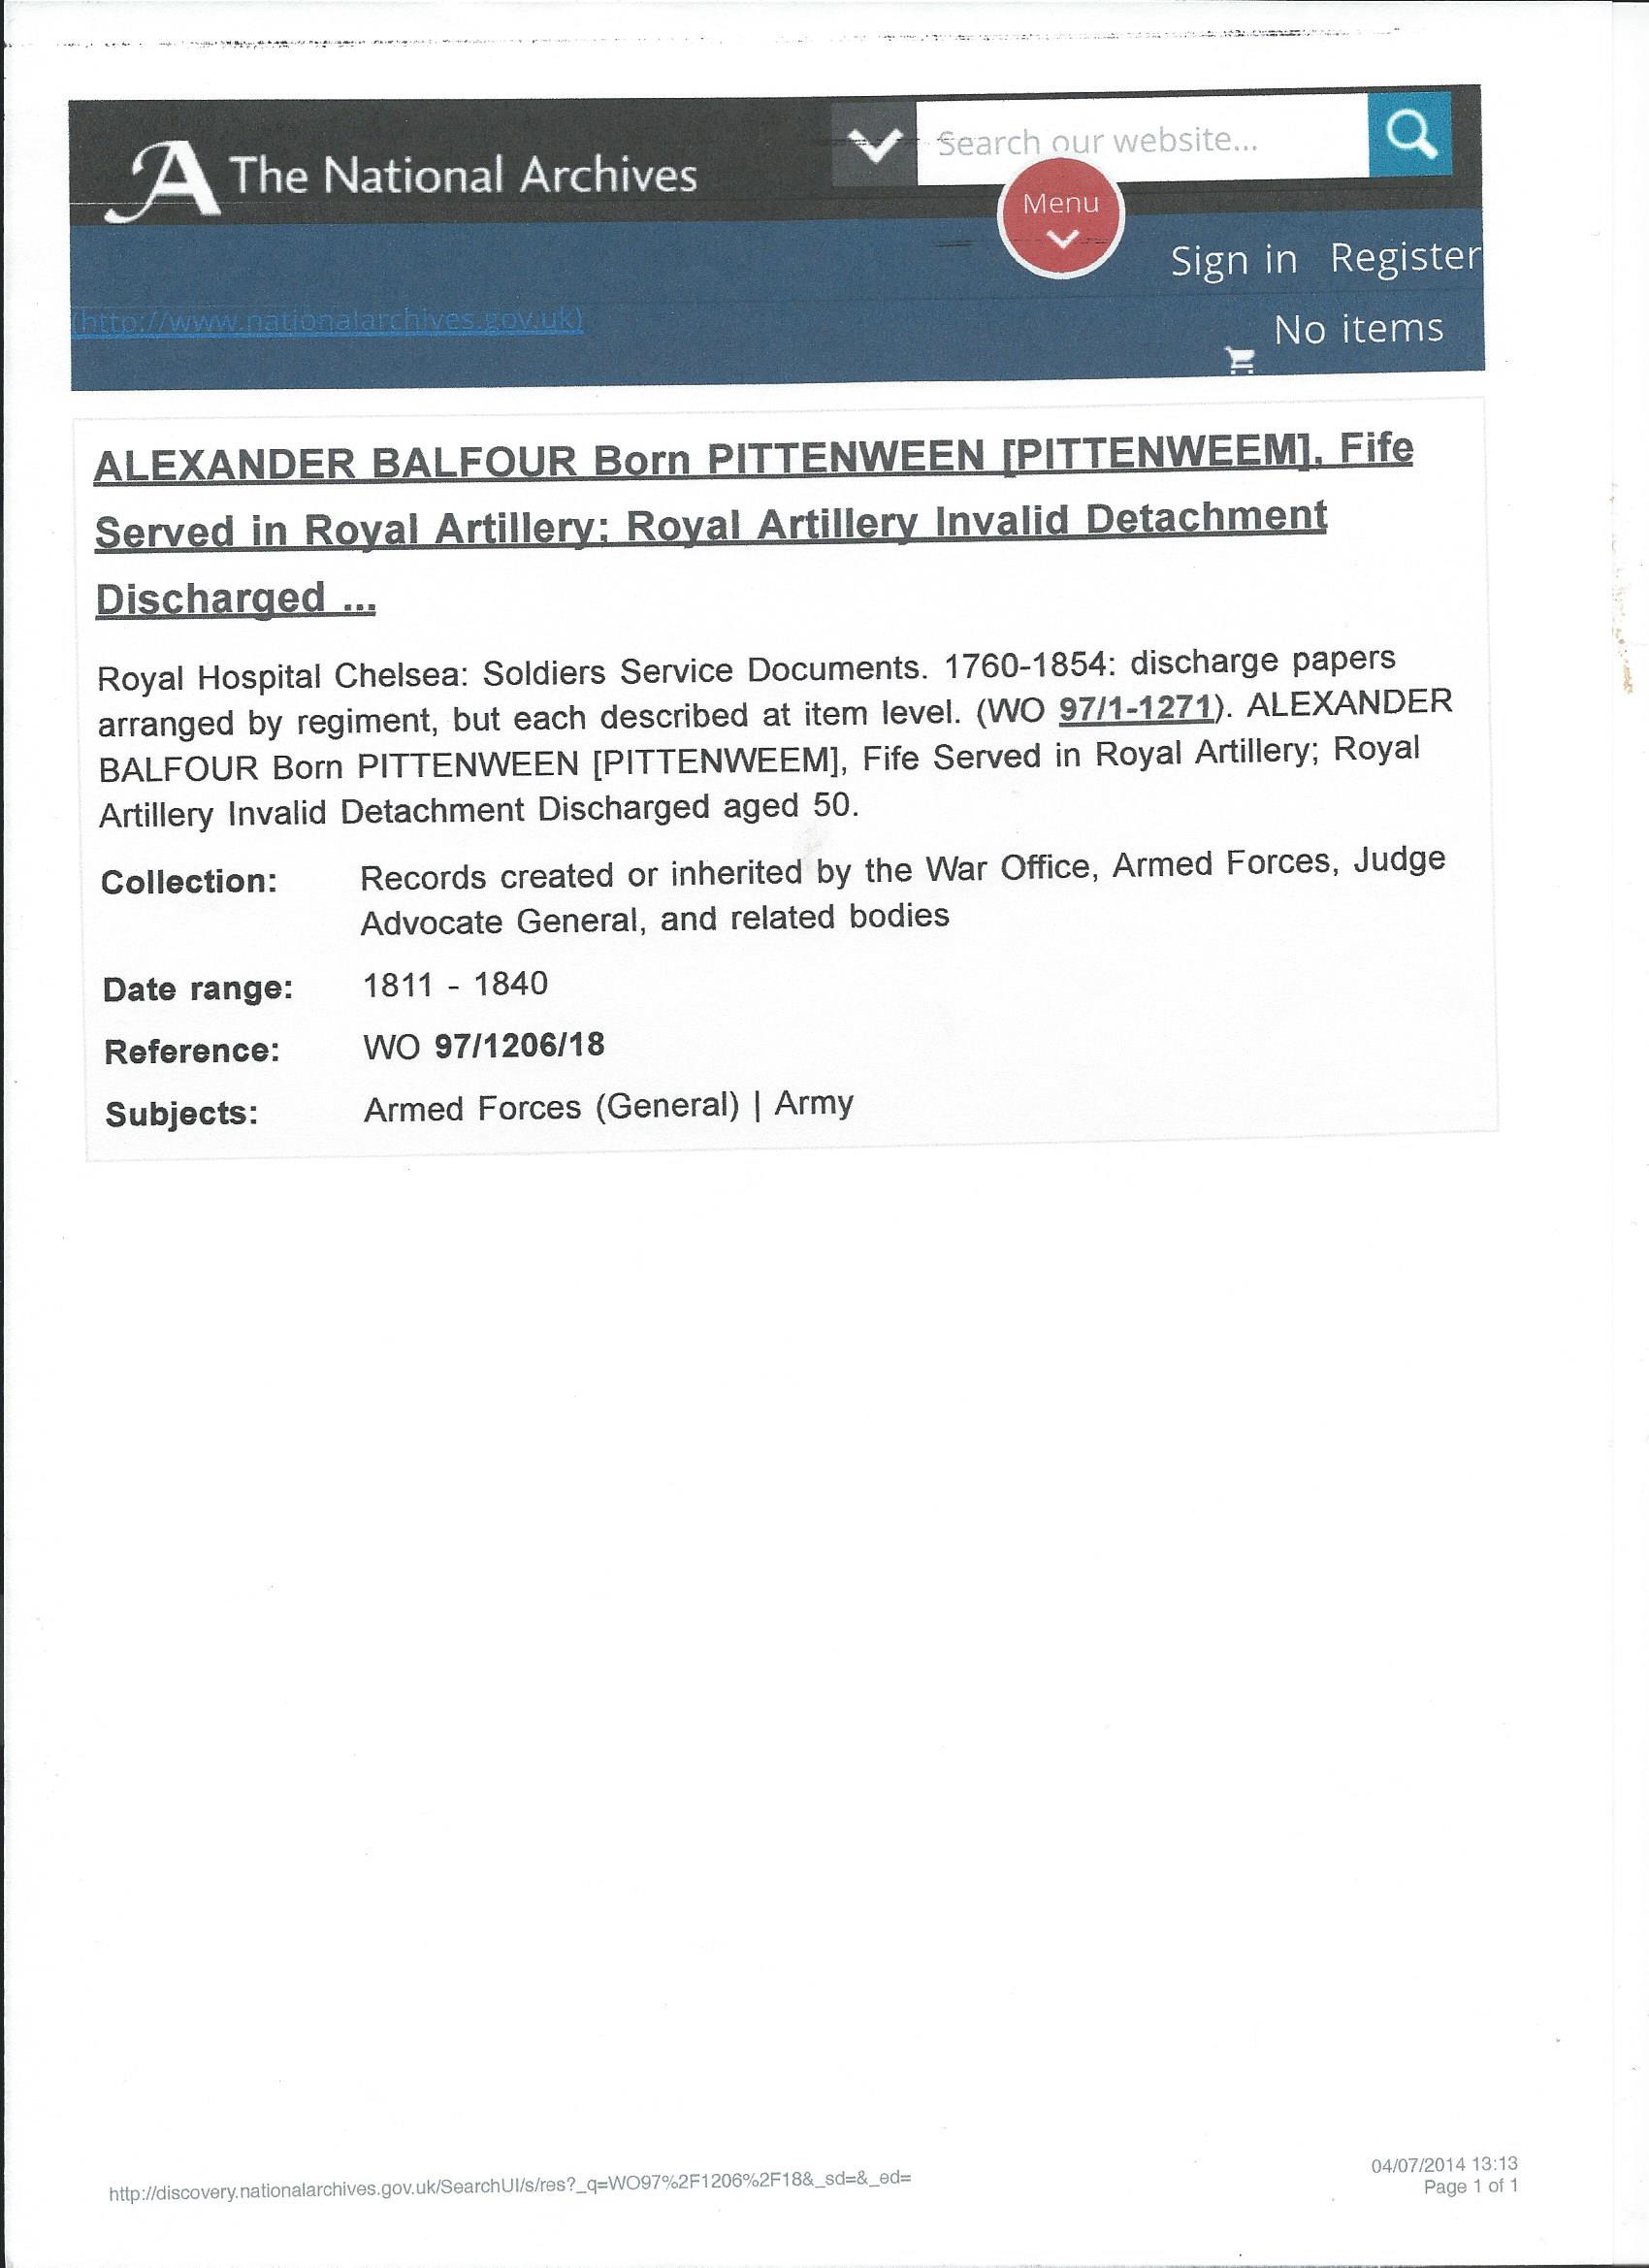 AlexrBalfour.discharge, Linked To: <a href='profiles/i3386.html' >Alexander Balfour</a>